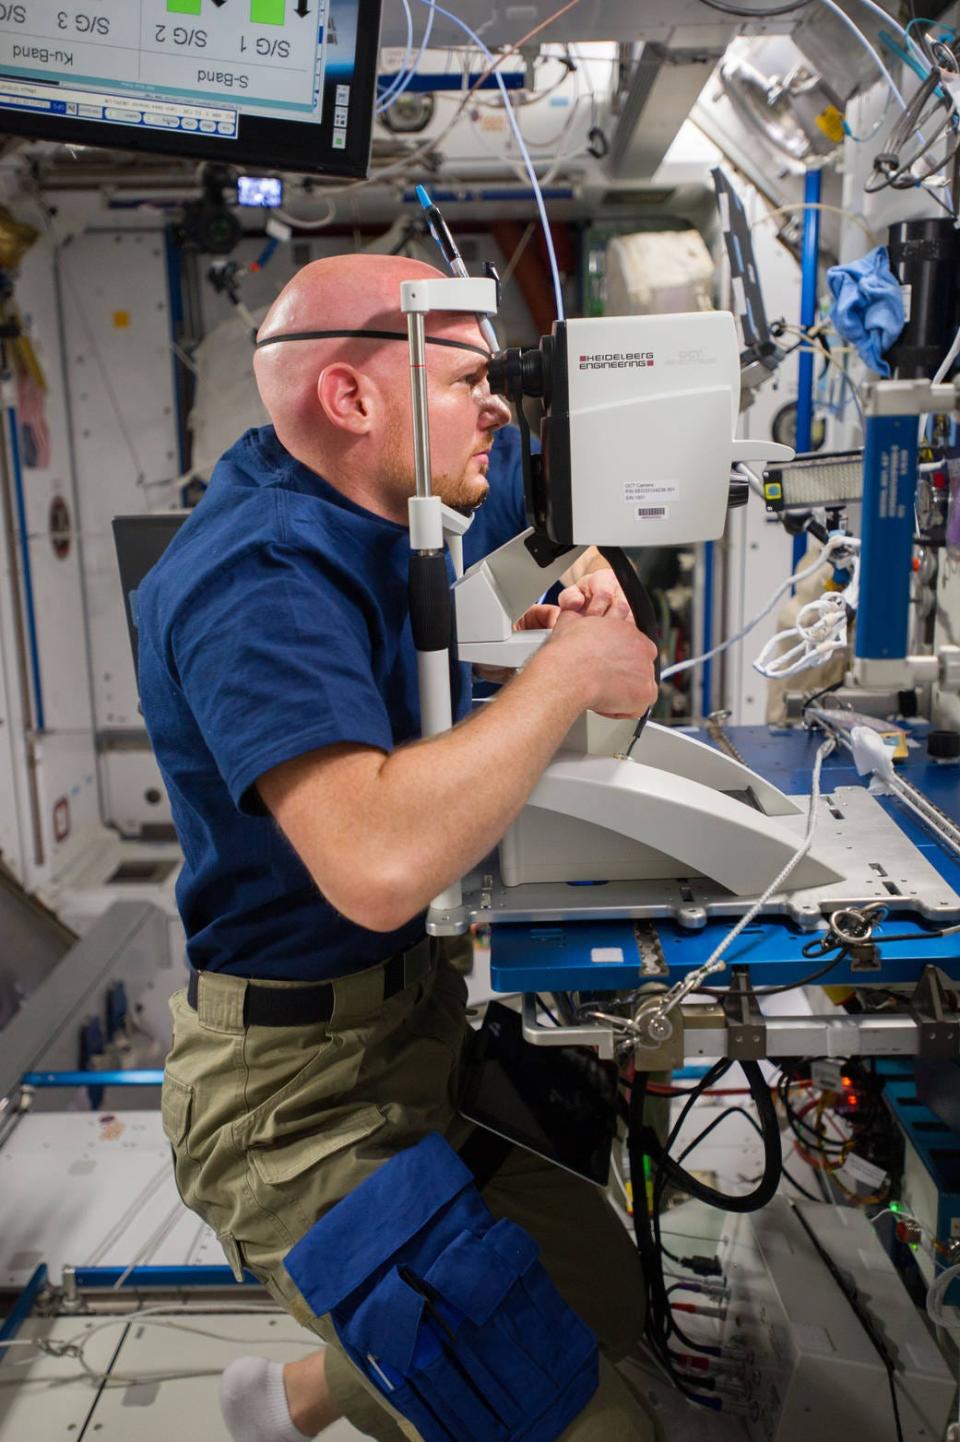 Astronaut Alexander Gerst takes a vision test on board a space craft.